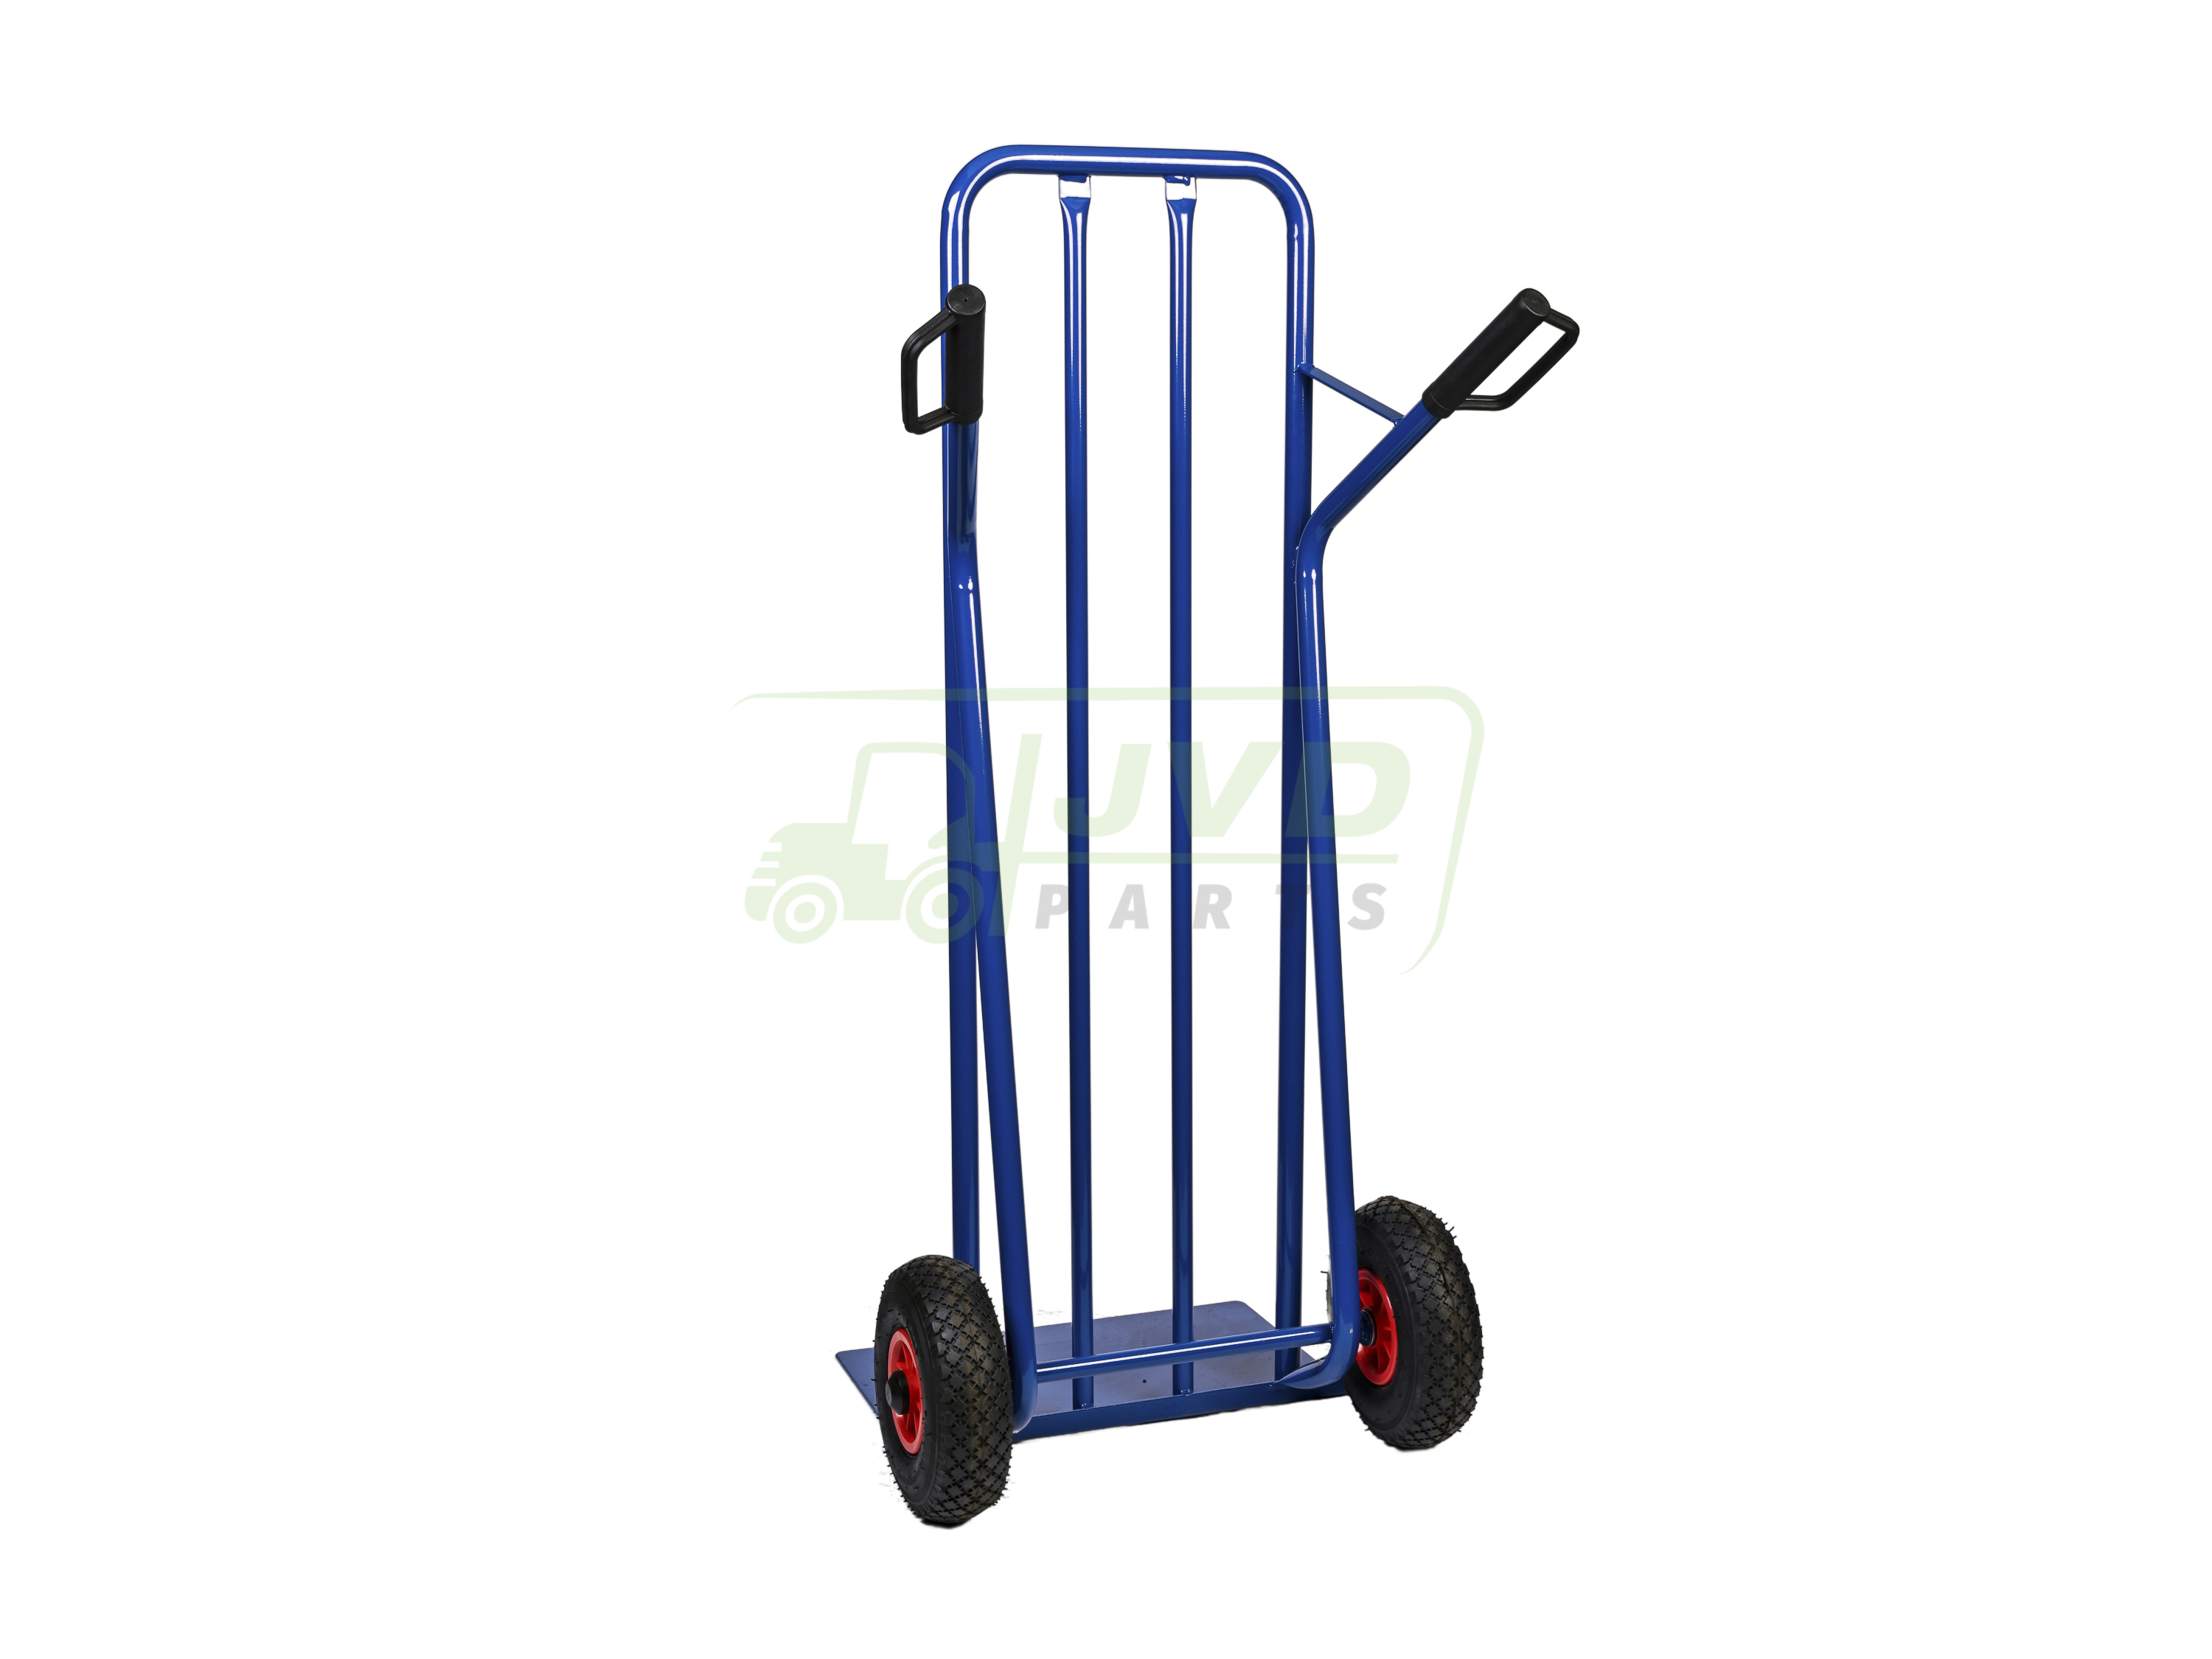 Handtrolley, Height 1300mm - Plate (500x300mm)